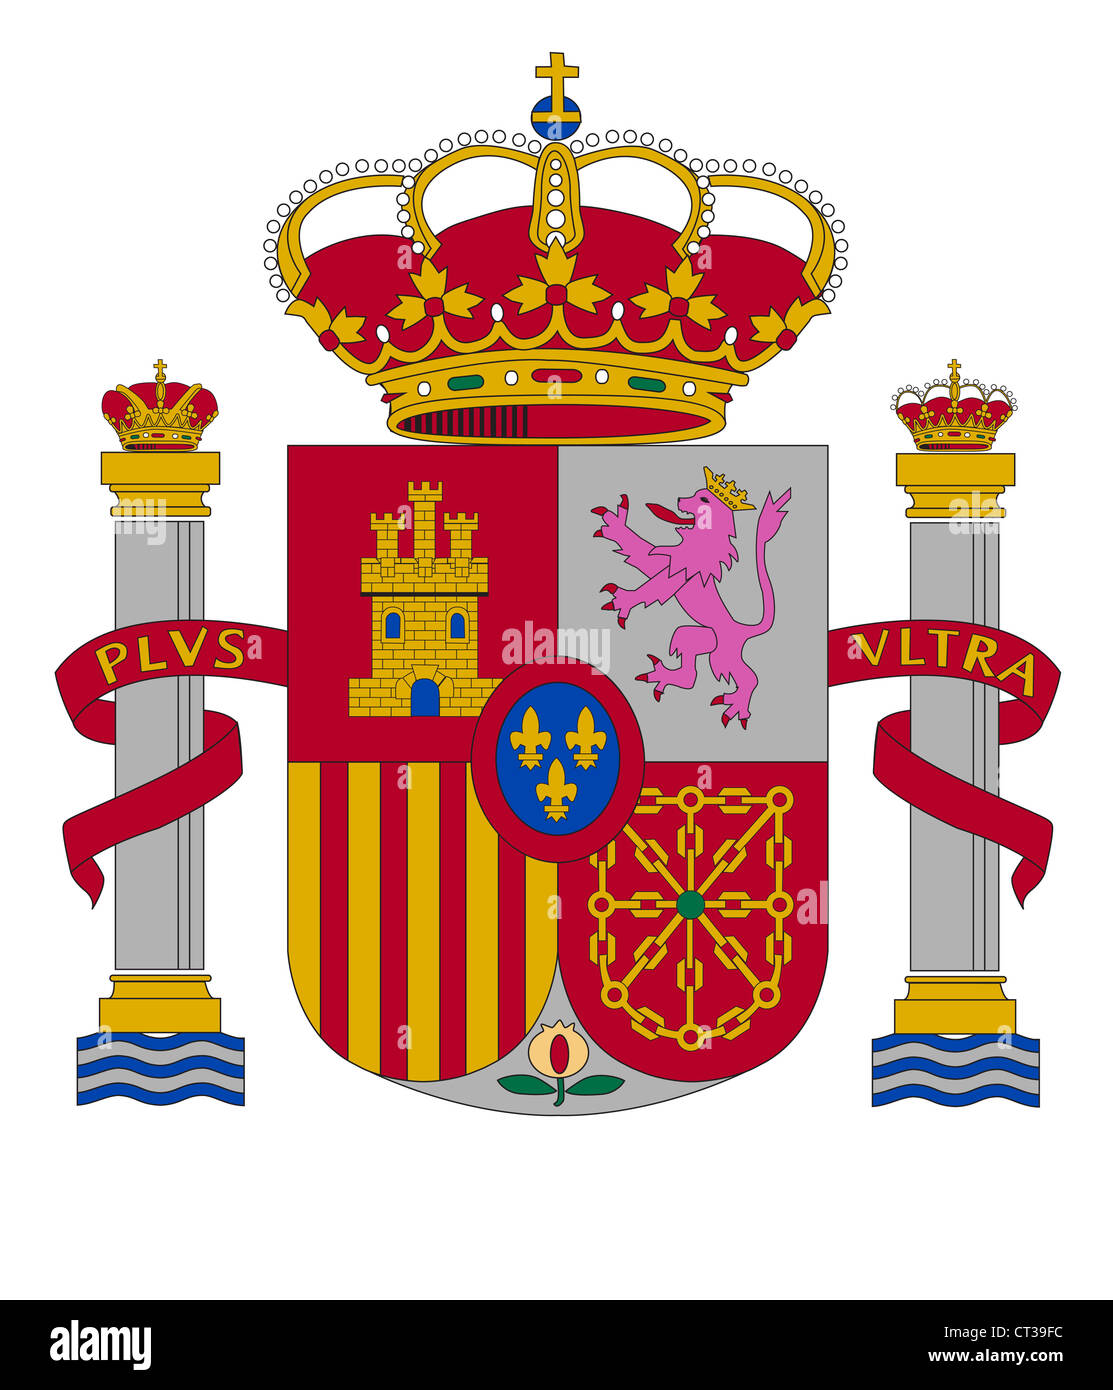 coat of arms of Spain illustration Stock Photo